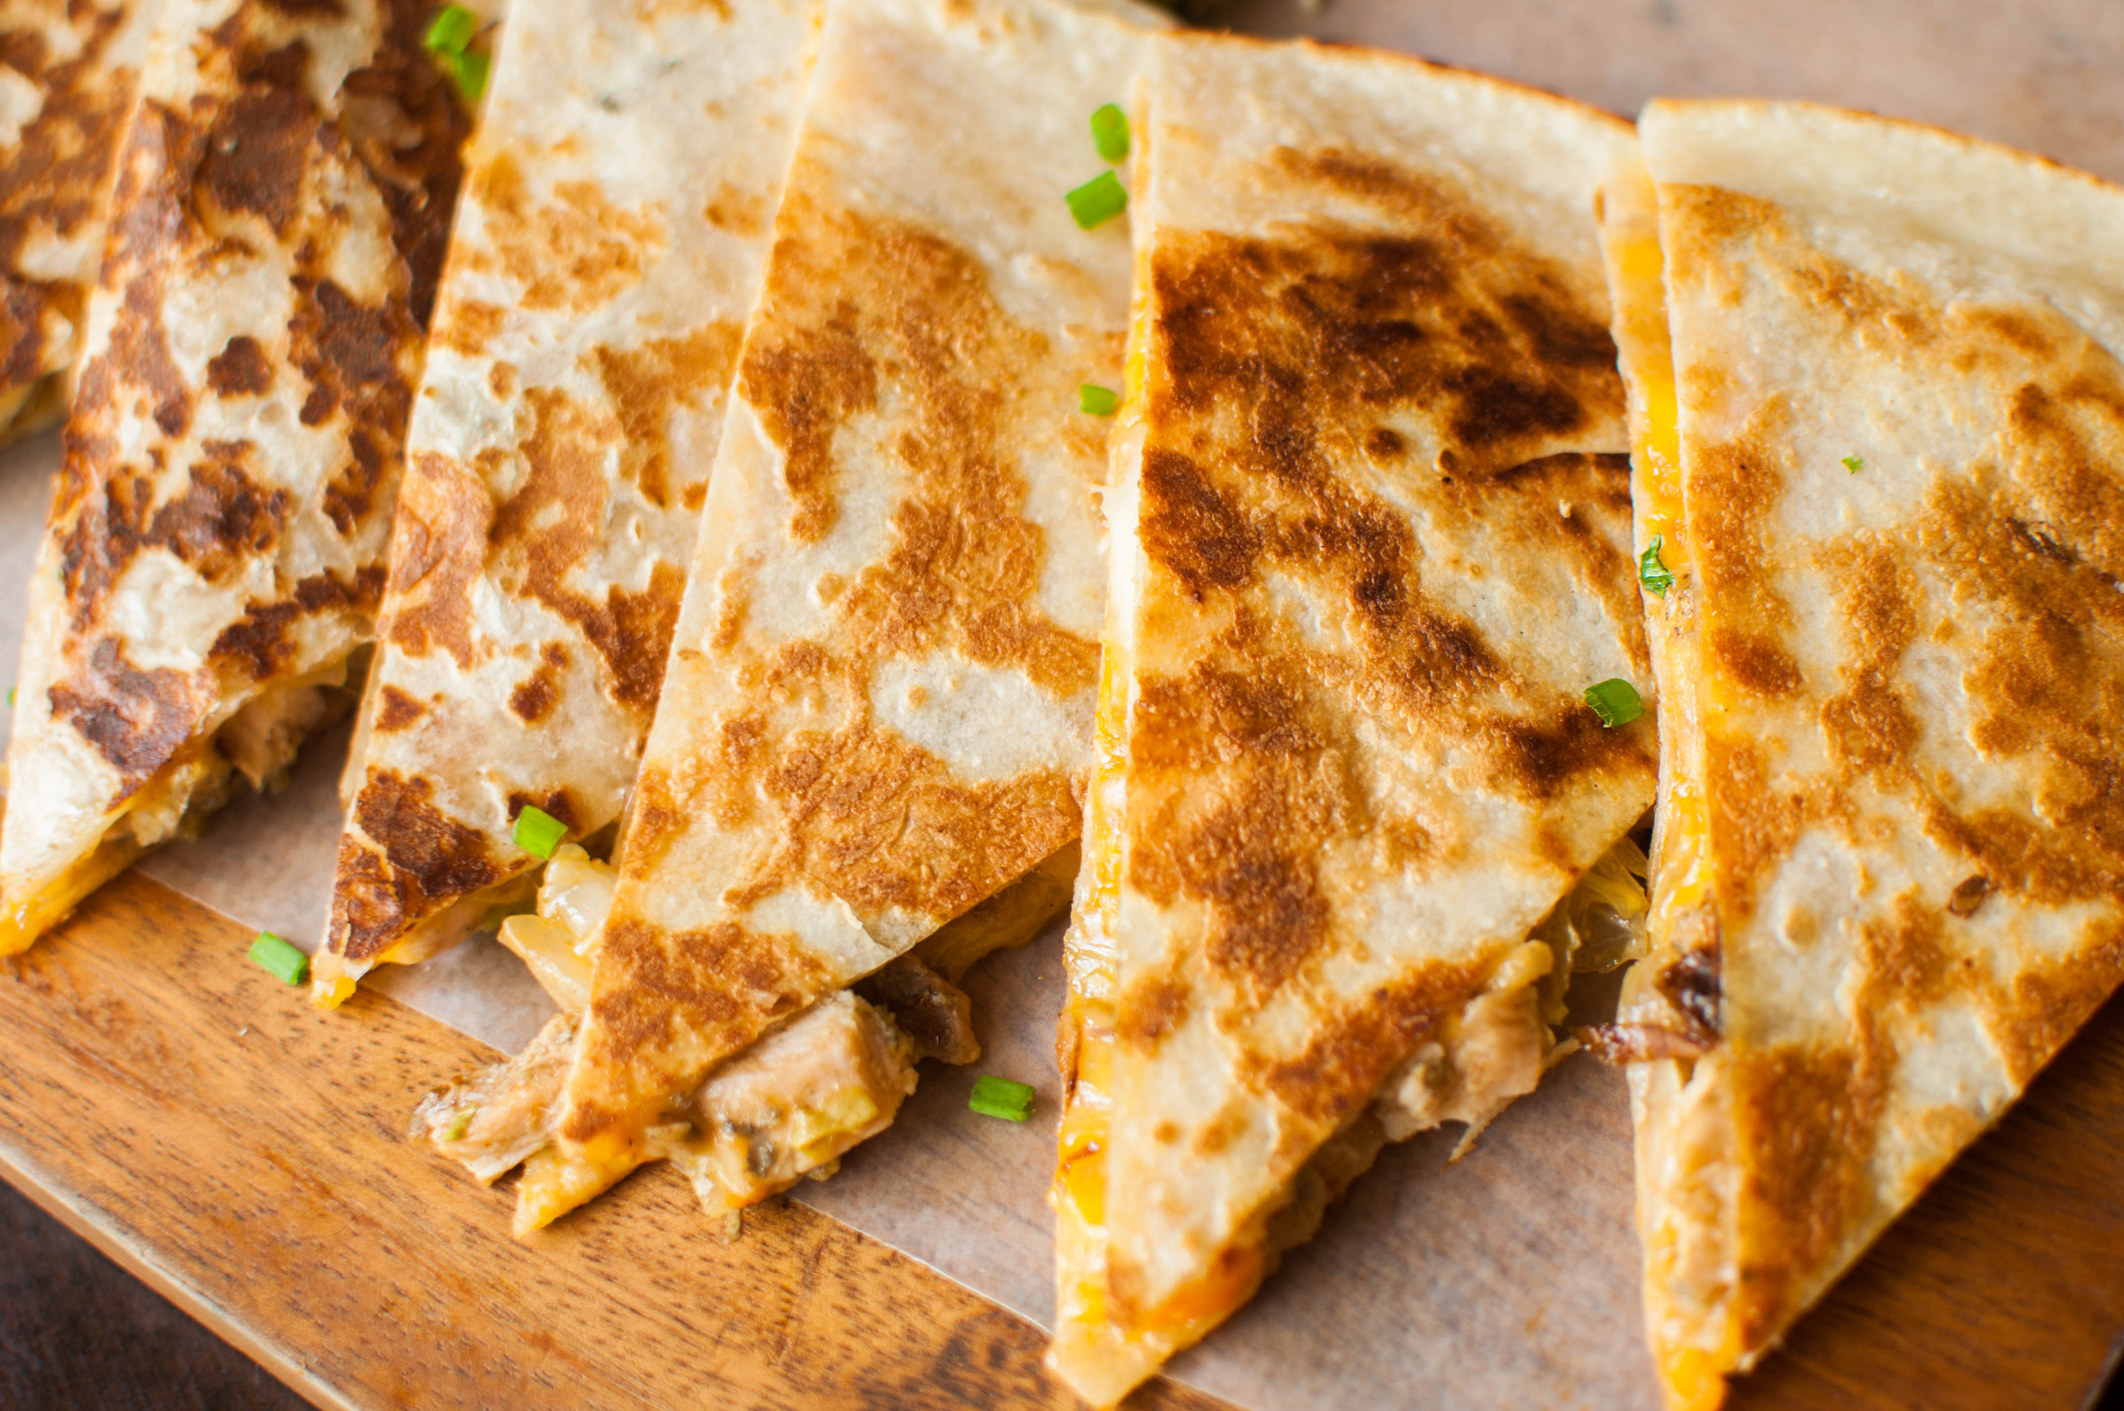 A plate of quesadillas.